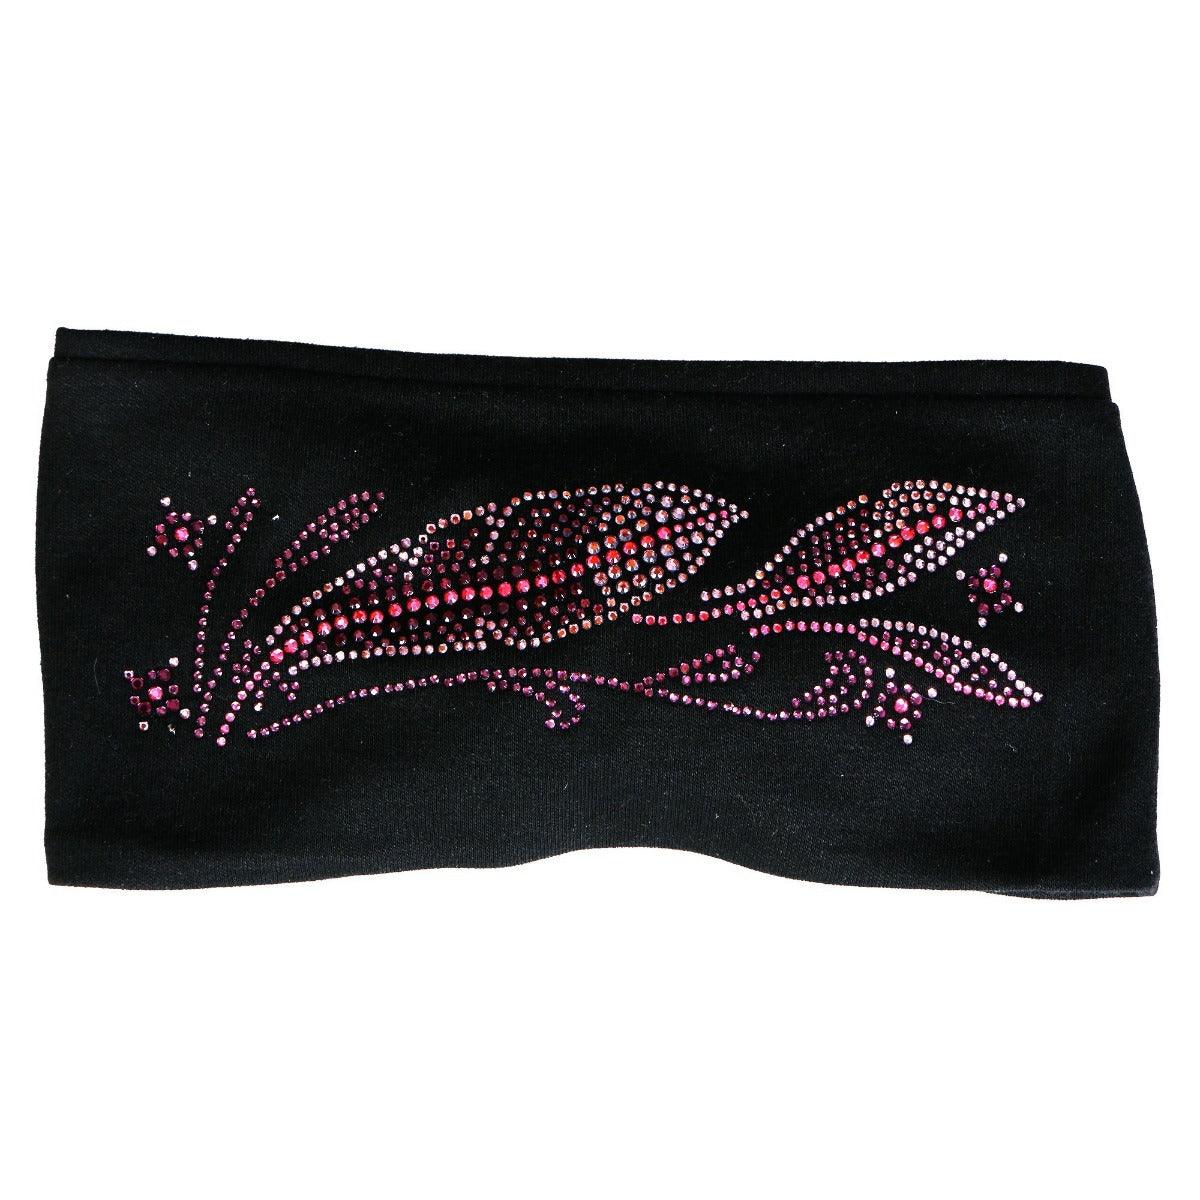 Hot Leathers Original Feathers Bling Wrap - American Legend Rider